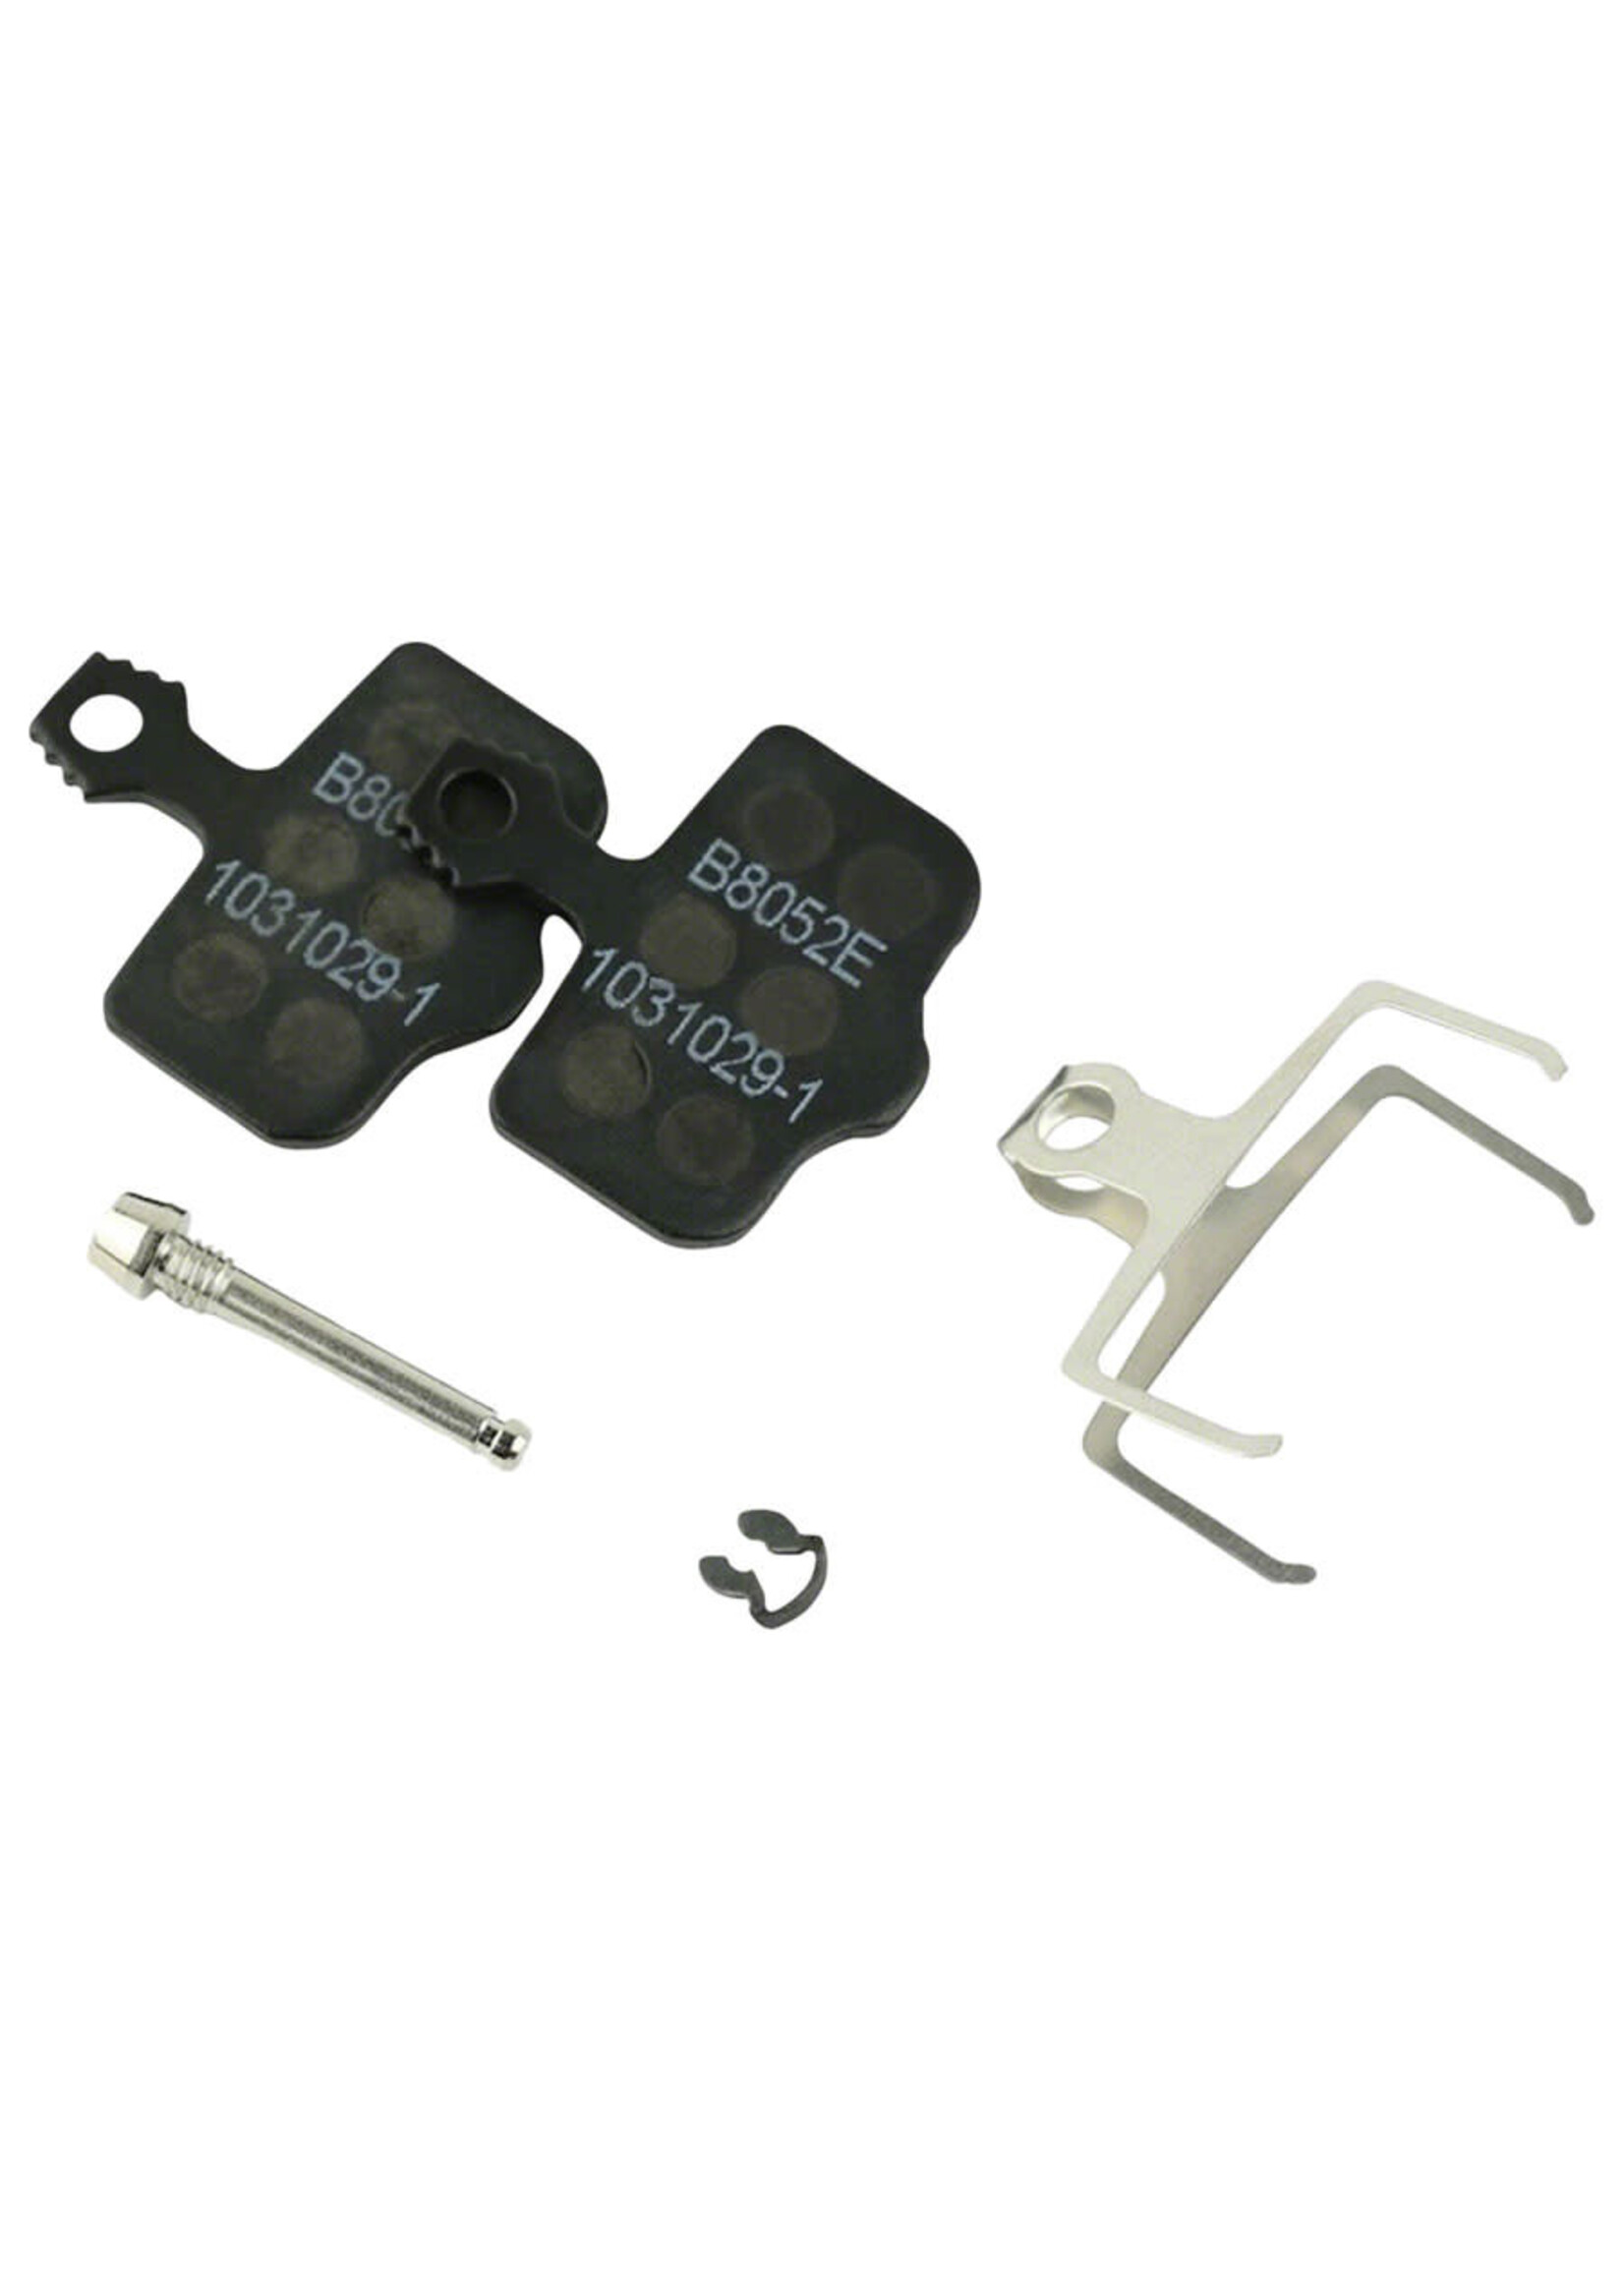 sram SRAM Disc Brake Pads - Organic Compound, Steel Backed, Quiet, For Level, DB, Elixir, and 2-Piece Road